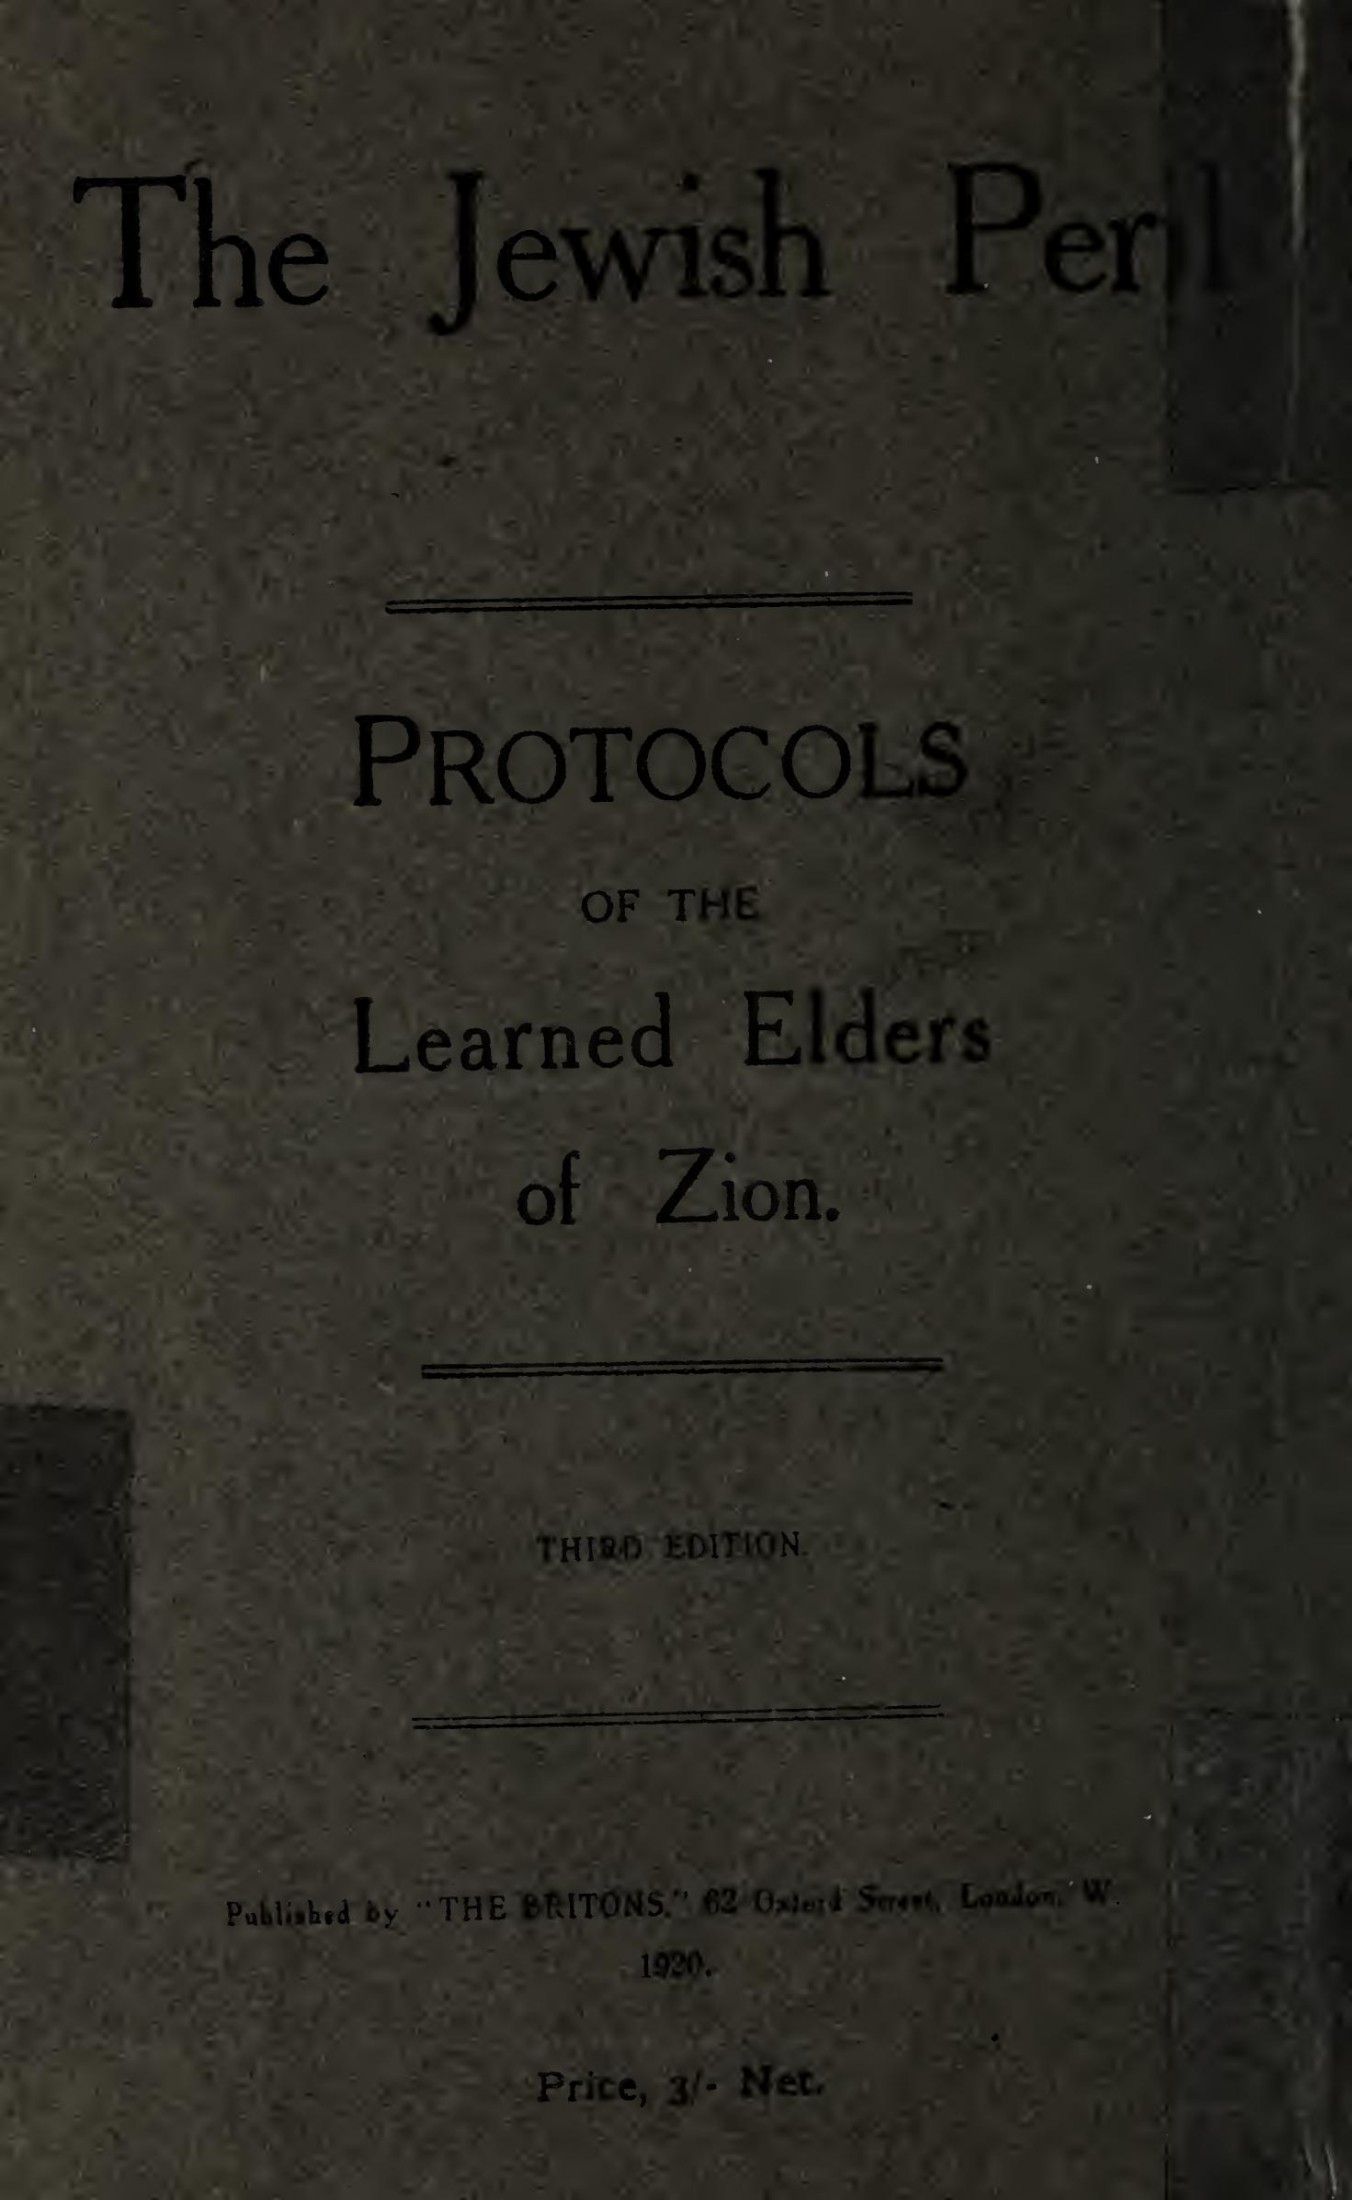 The Jewish Peril - Protocols of the Learned Elders of Zion (1919) by Sergyei Nilus, 1862-1930